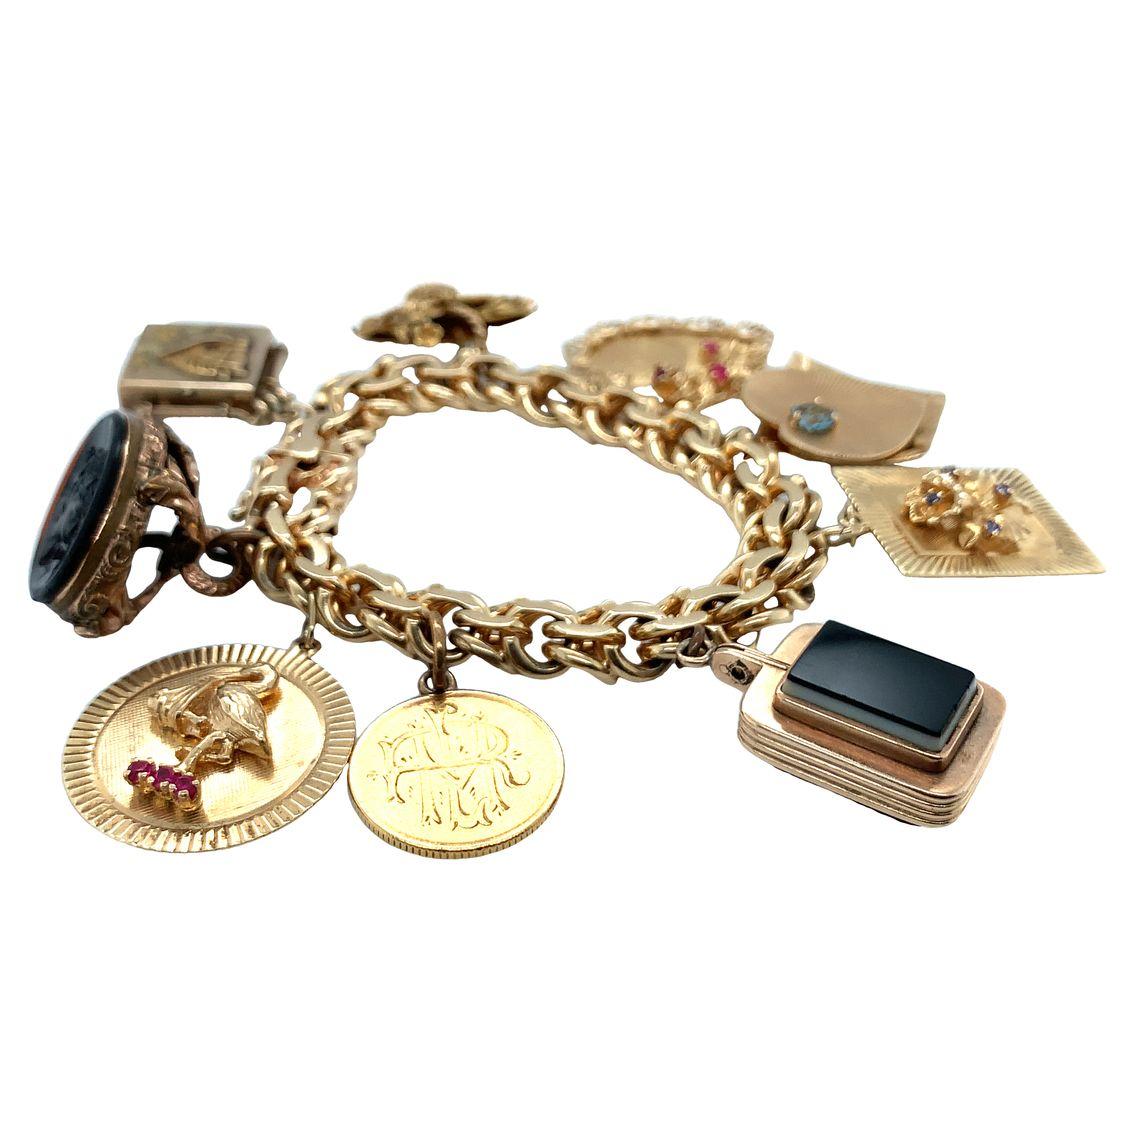 One 14K yellow gold charm bracelet with 9 miscellaneous charms and doubled circular links.

Nostalgic, substantial, weighty.

Metal: 14K yellow gold
Circa: 1960s
Size/Measurements: 7 inches long
Weight: 114 grams
